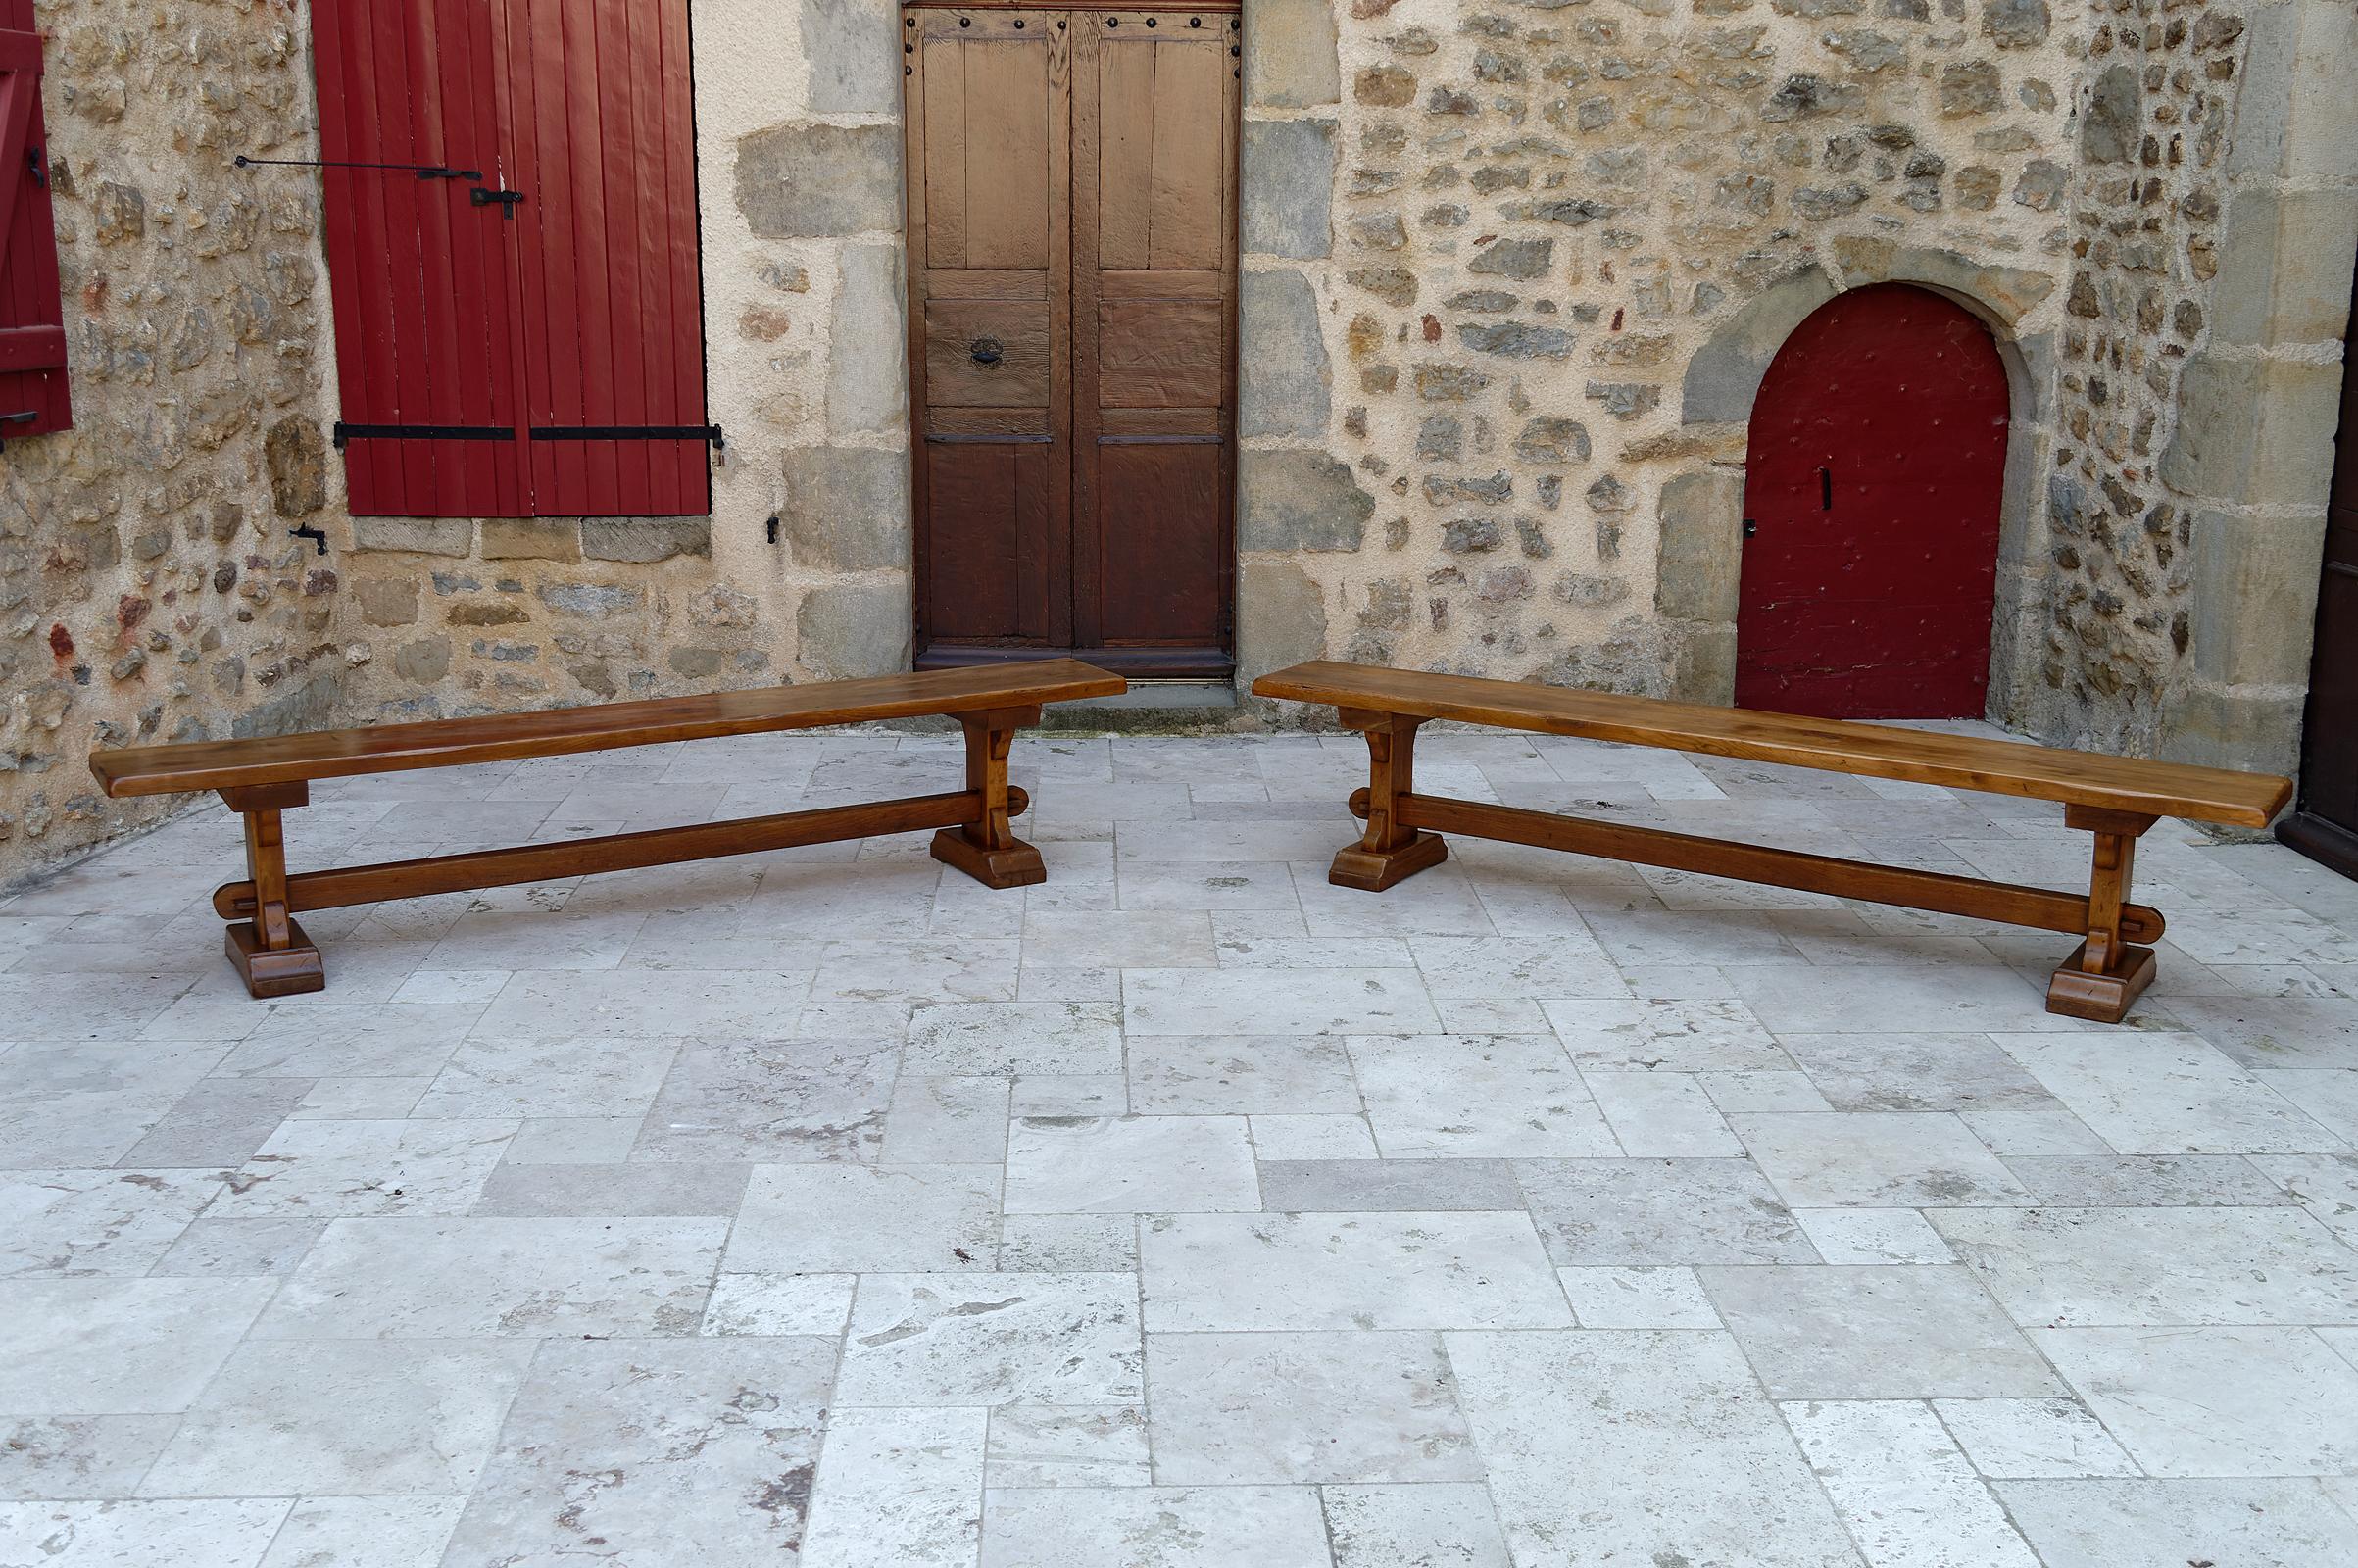 Pair of farm/monastic community benches.
Rustic / French provincial style.

France, early 20th century.

Good condition.

Dimensions:
height 46 cm
width 220 cm
depth 30 cm
Weight: 40 kgs